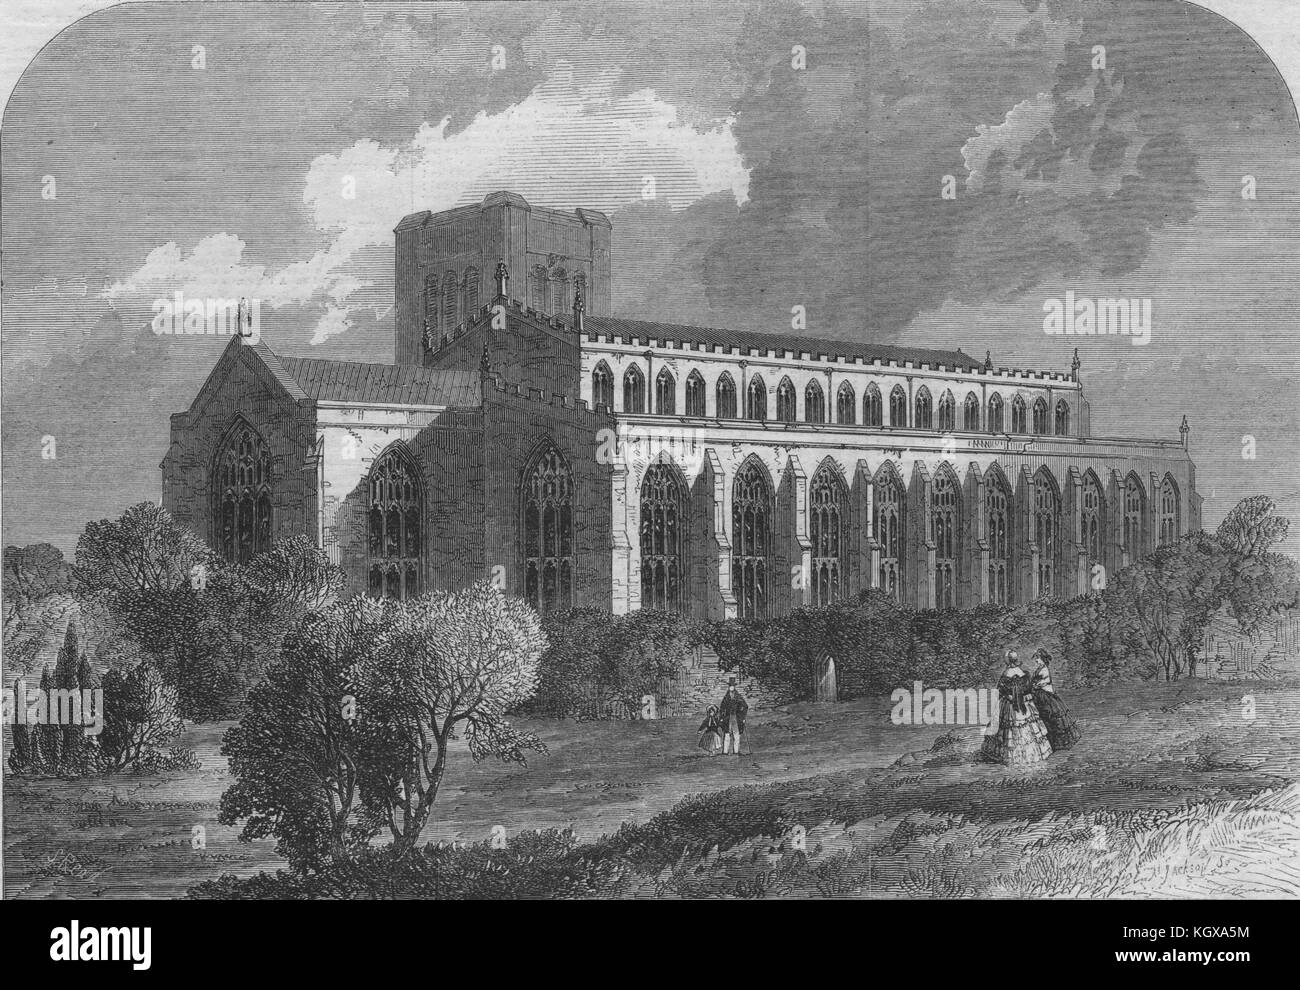 The Abbey Church of Bury St. Edmunds, viewed from the gardens. Suffolk 1860. The Illustrated London News Stock Photo